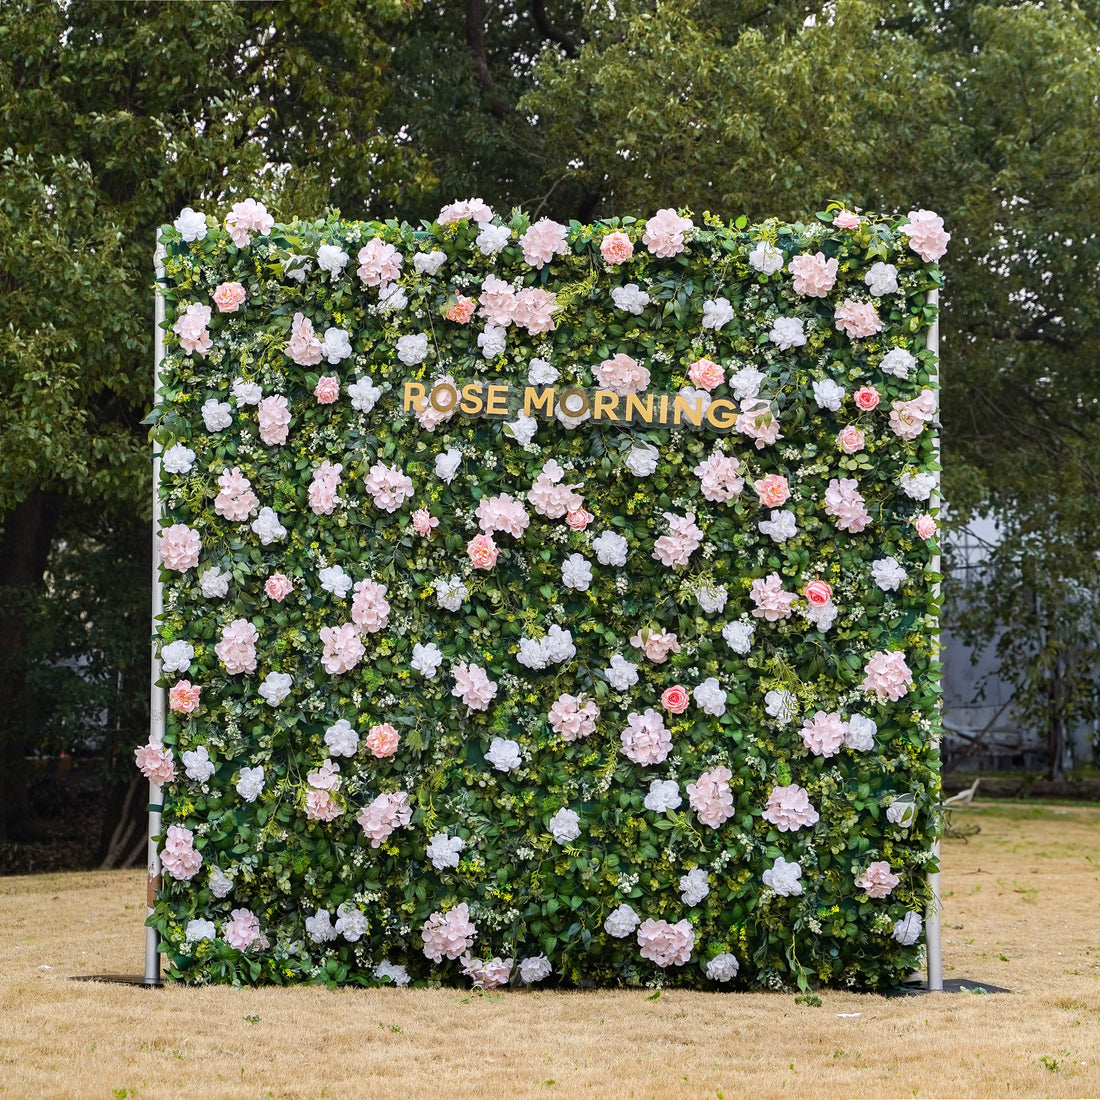 Lin： Fabric Artificial zip up curtain flower wall 8ft*8ft (SHIP TO USA ONLY) Rose Morning